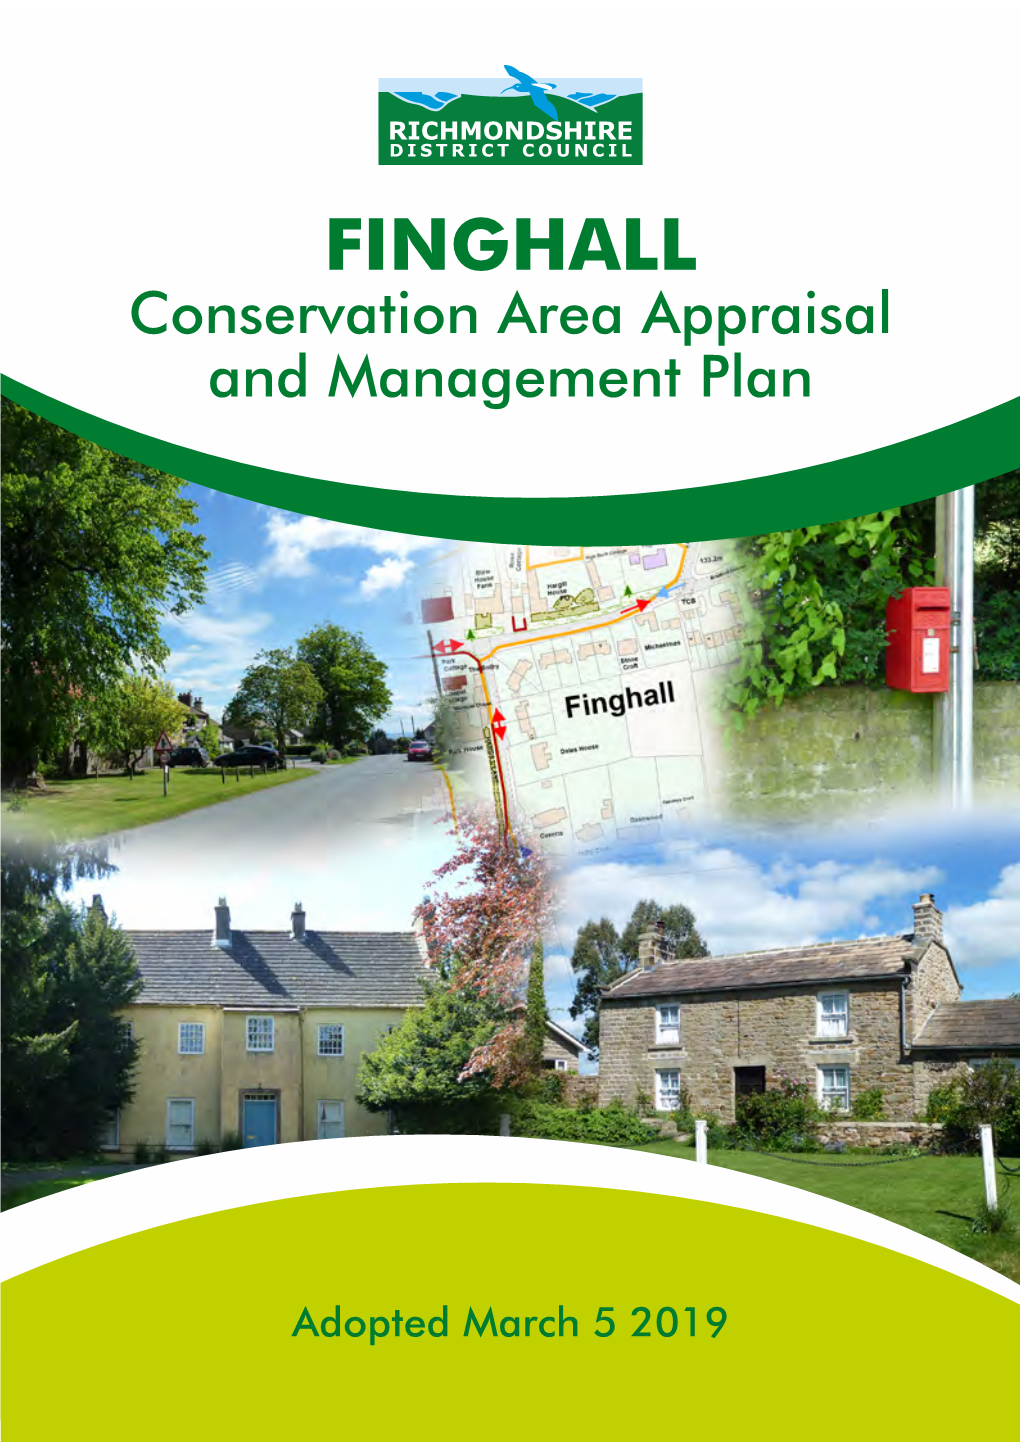 FINGHALL Conservation Area Appraisal and Management Plan